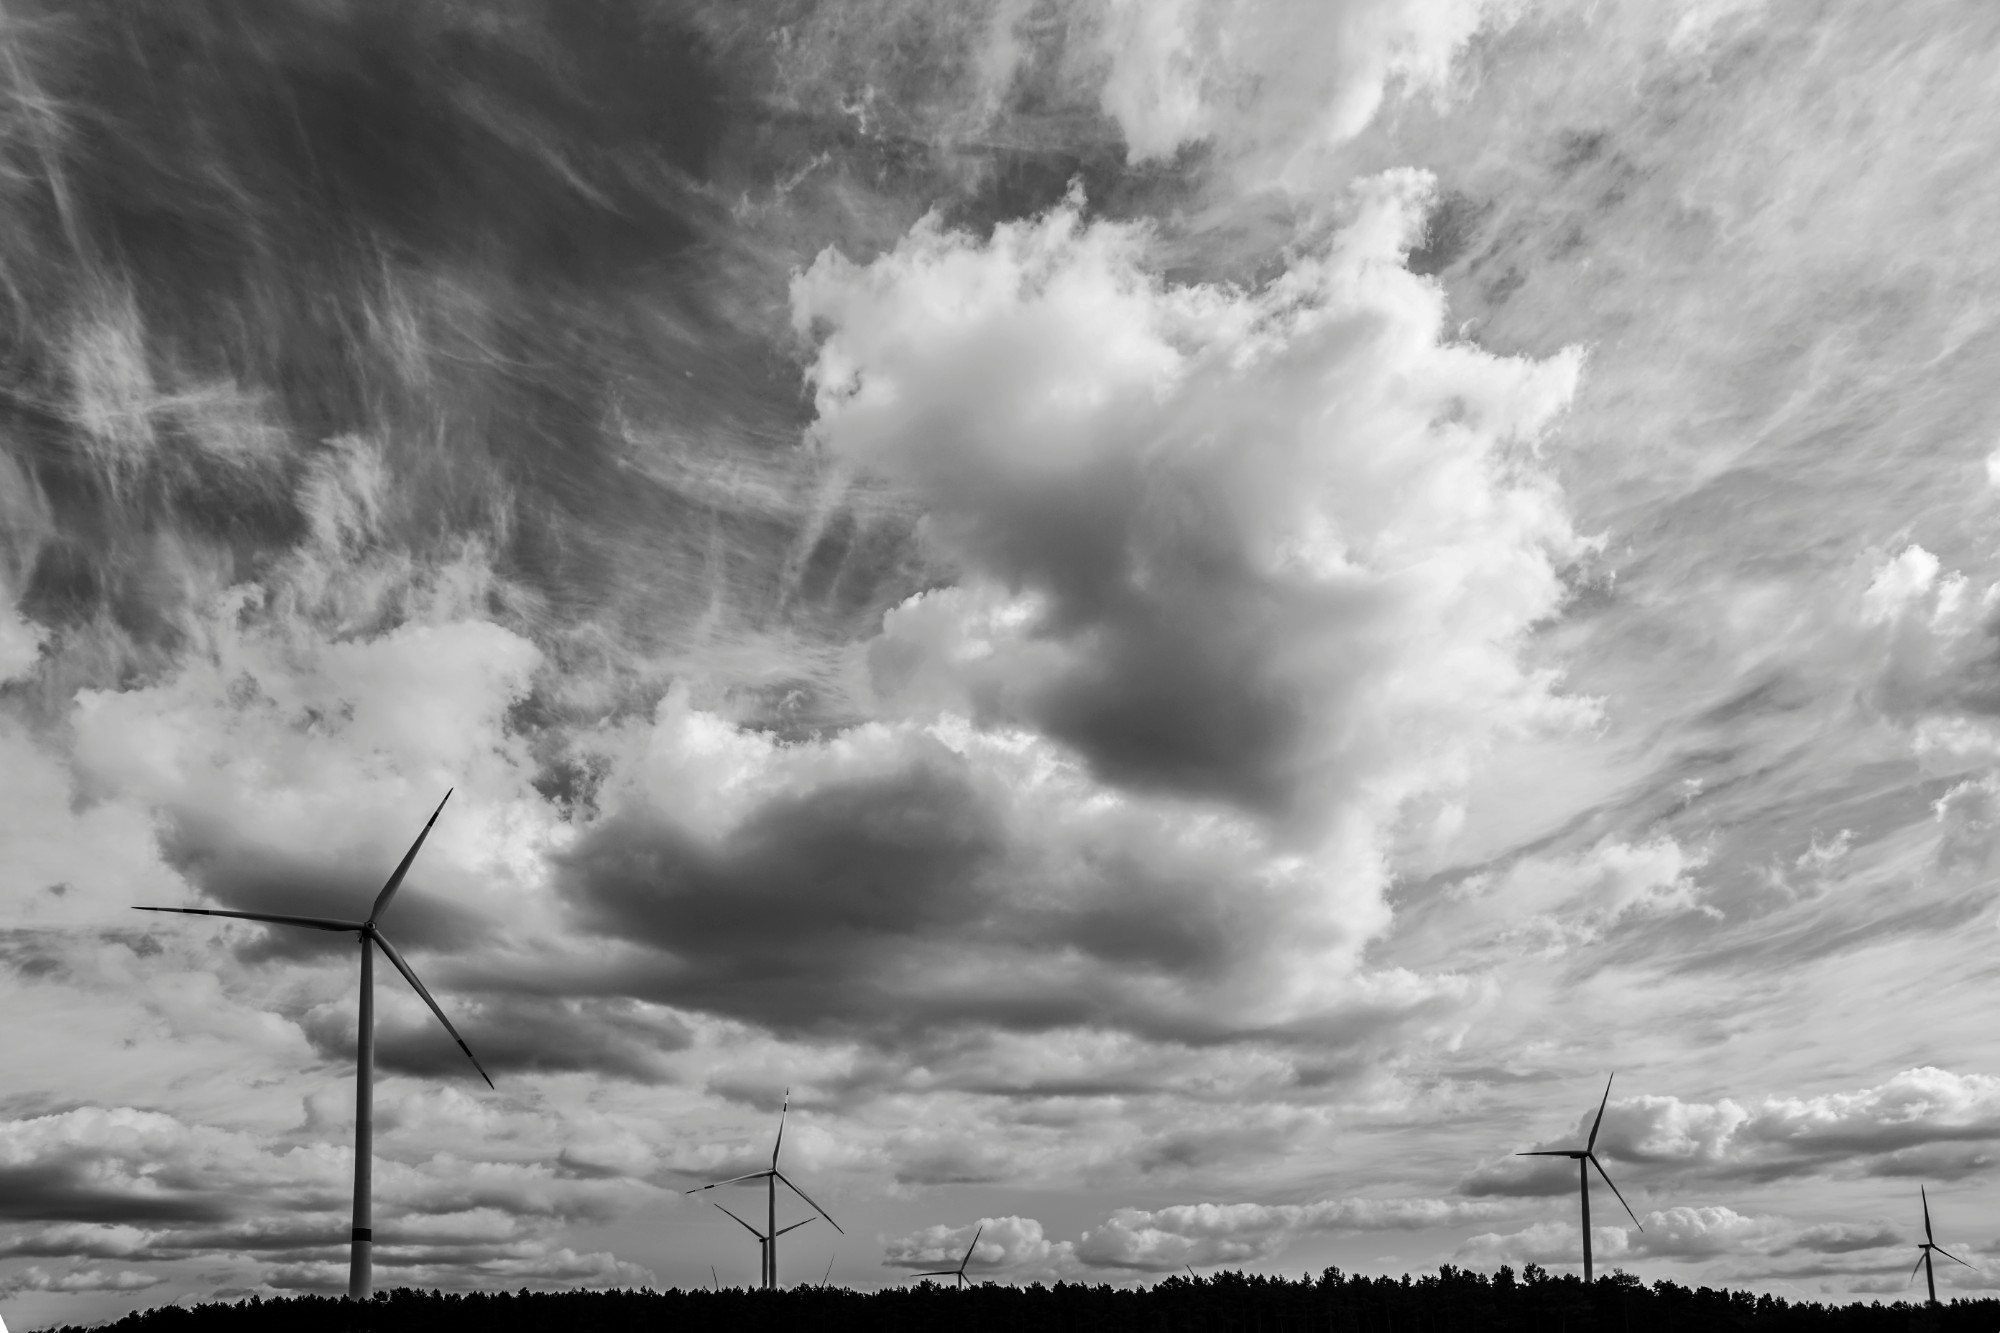 Grayscale photo of wind turbines under cloudy sky